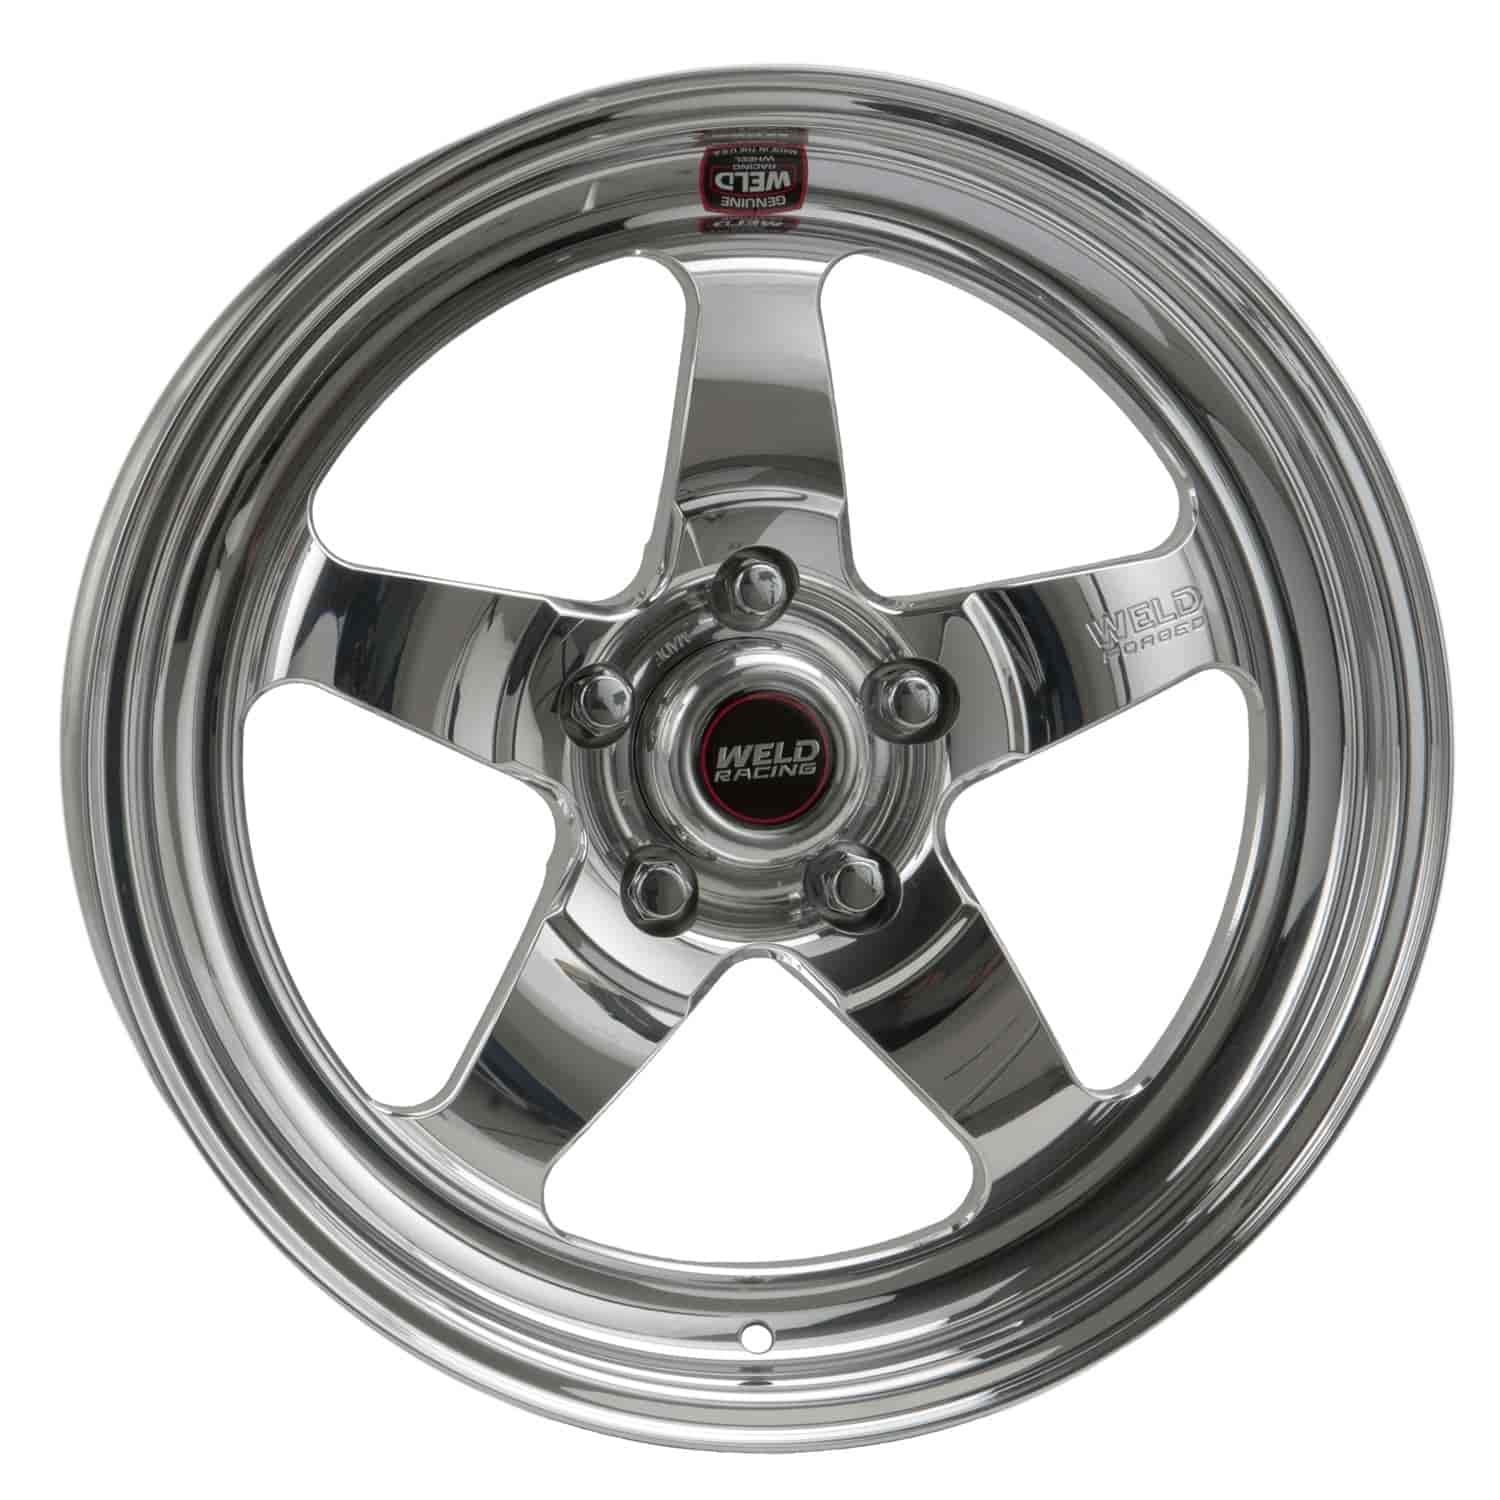 RT-S Series Wheel Size: 15" x 9" Bolt Circle: 5 x 4-1/2" Rear Spacing: 5-1/2" Offset: +9.21mm